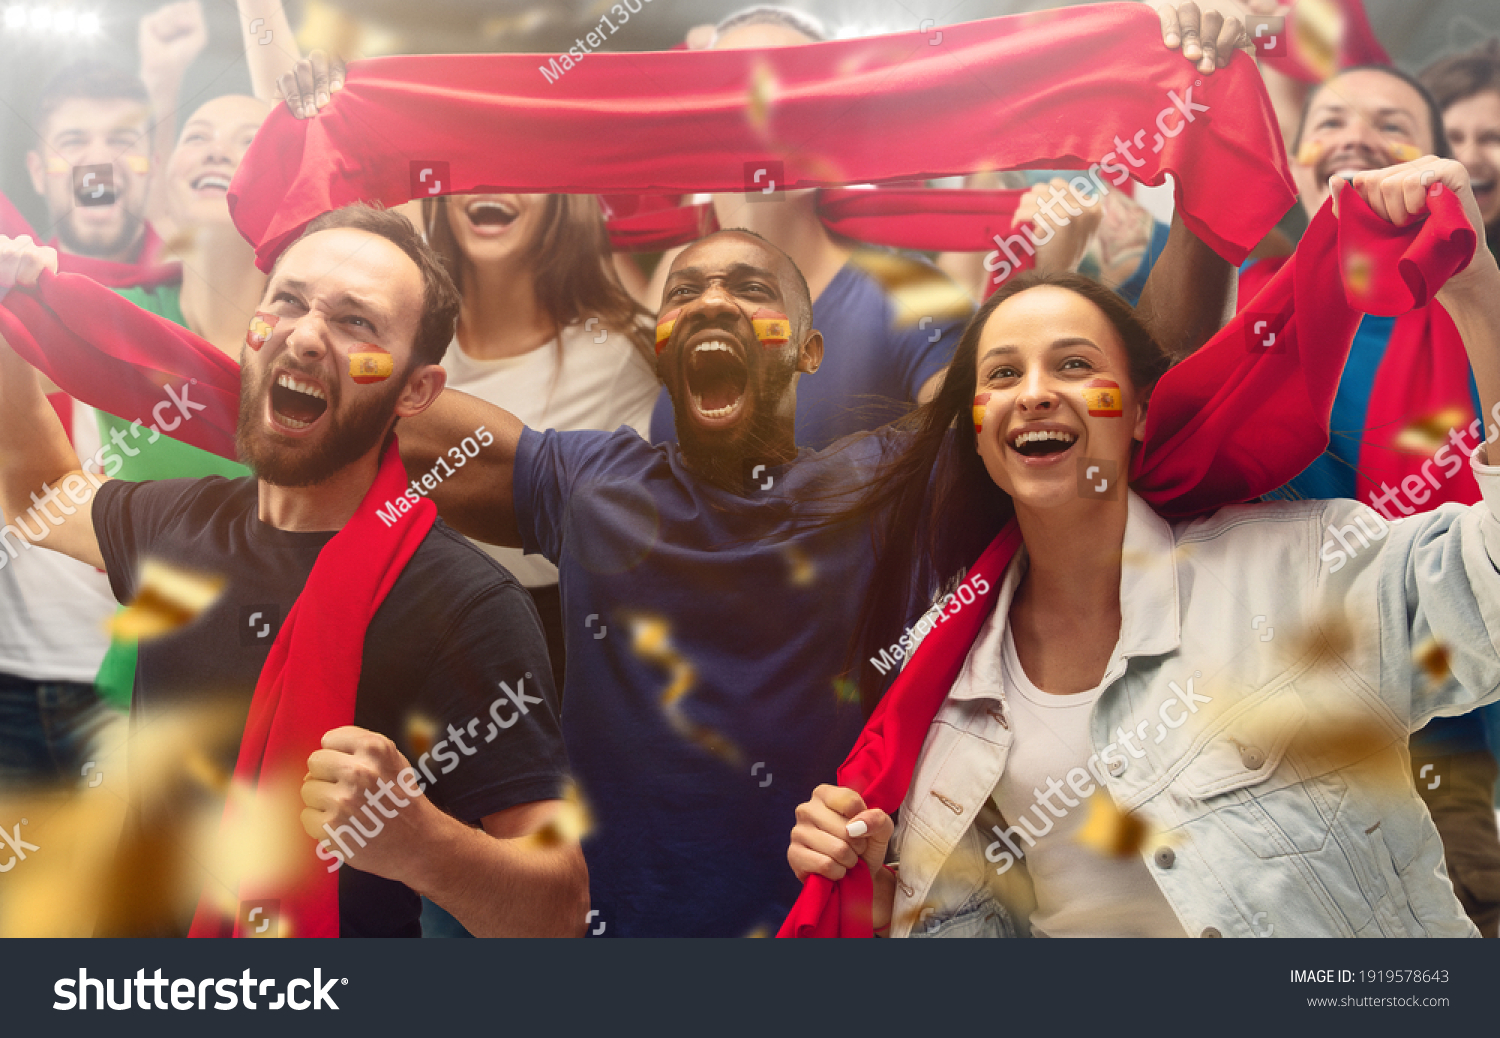 Spainian football, soccer fans cheering their team with a red scarfs at stadium. Excited fans cheering a goal, supporting favourite players. Concept of sport, human emotions, entertainment. #1919578643